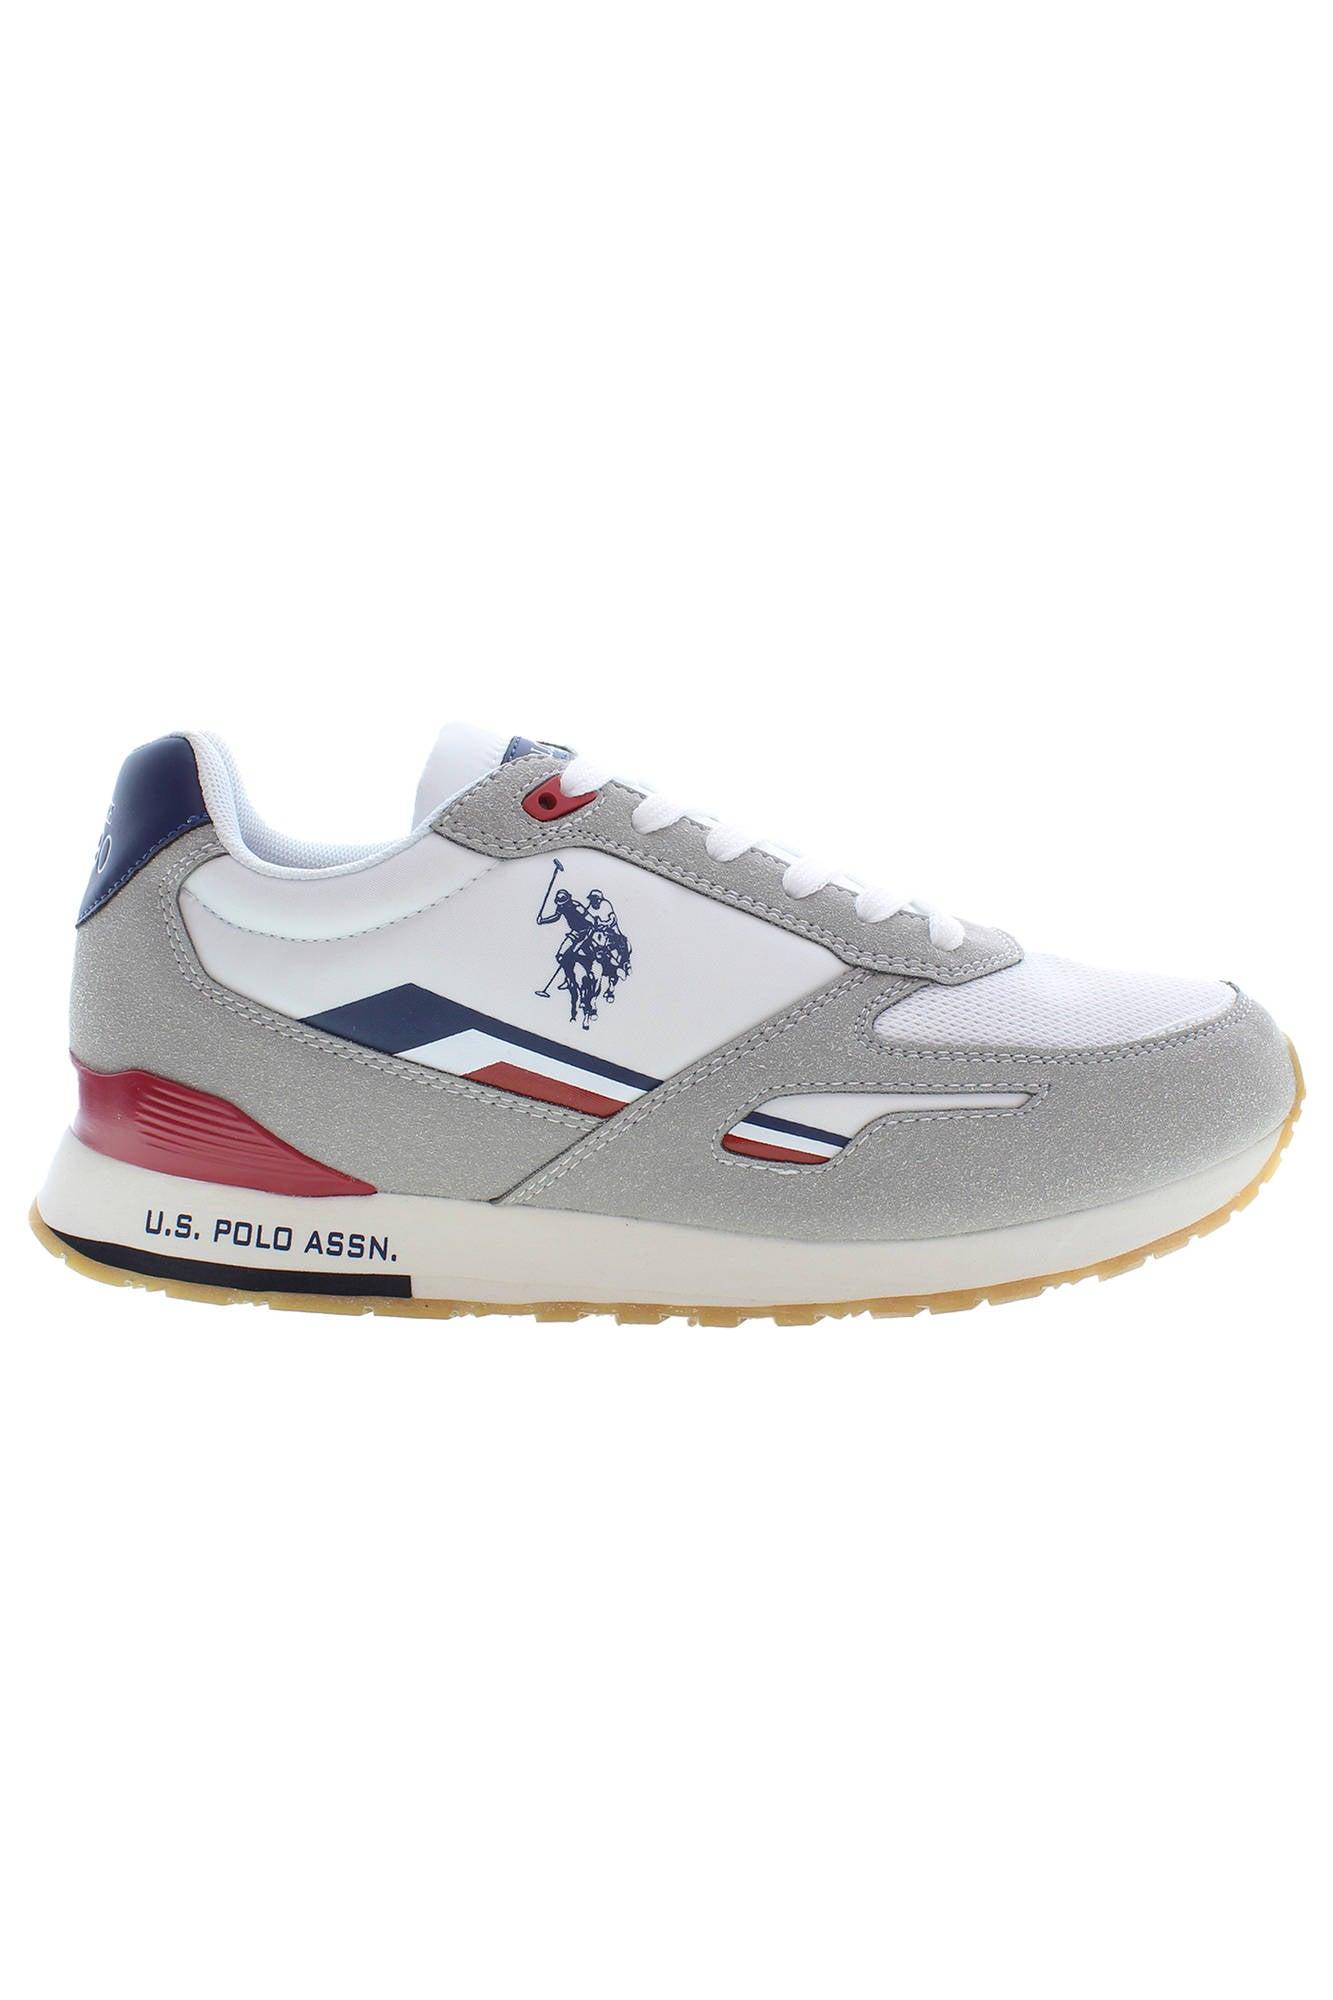 U.S. POLO ASSN. Sneakers in White for Men | Lyst